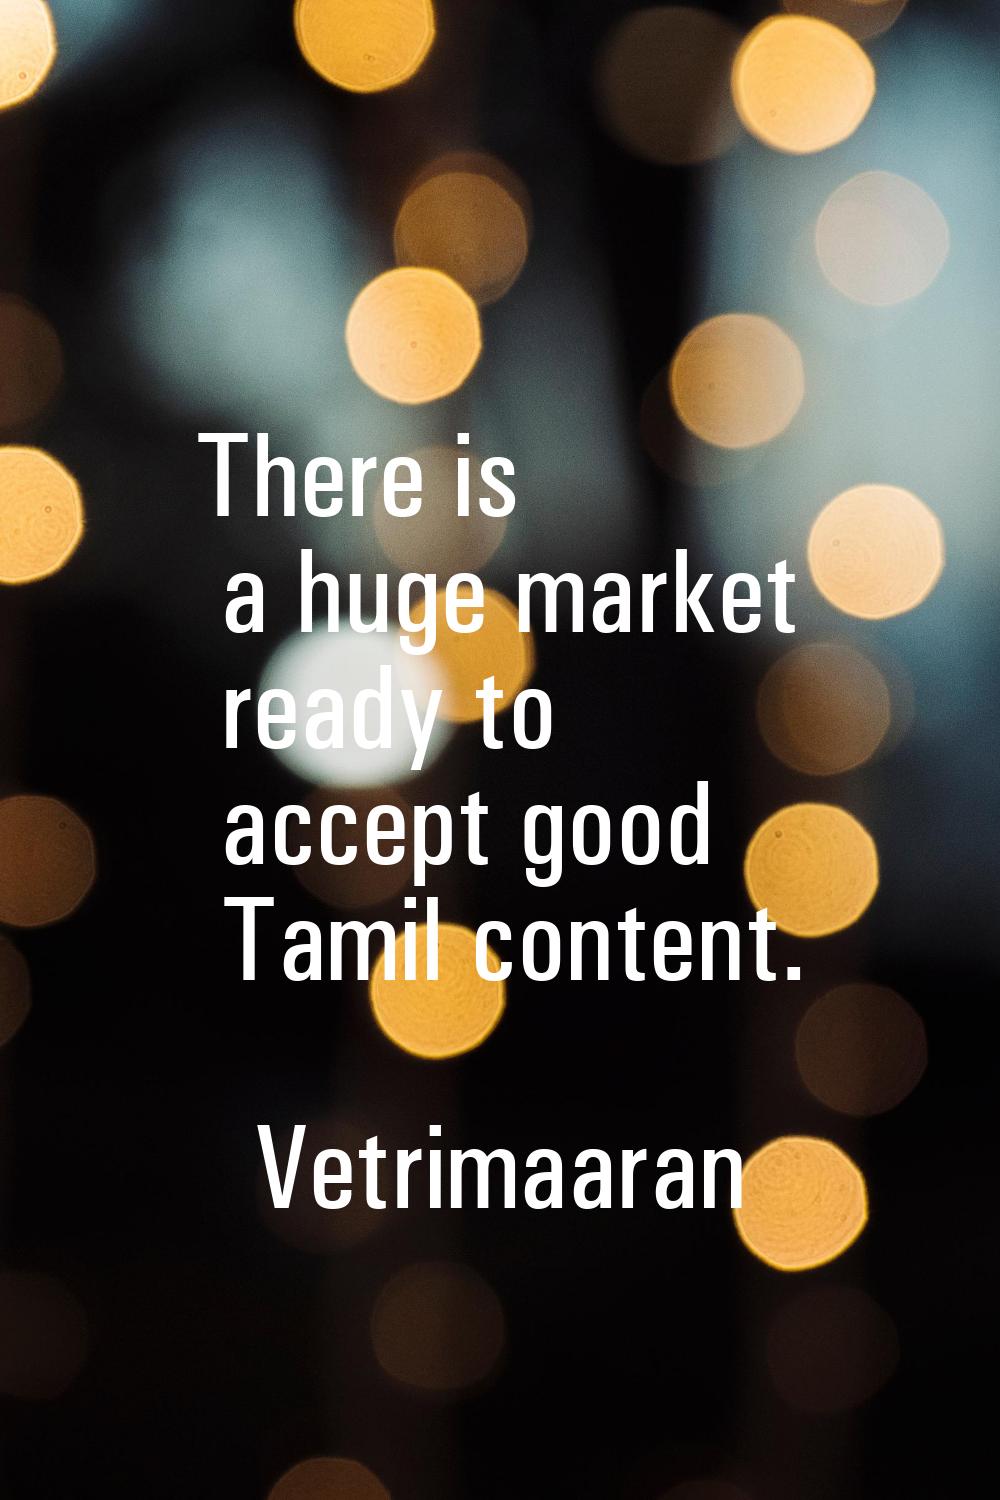 There is a huge market ready to accept good Tamil content.